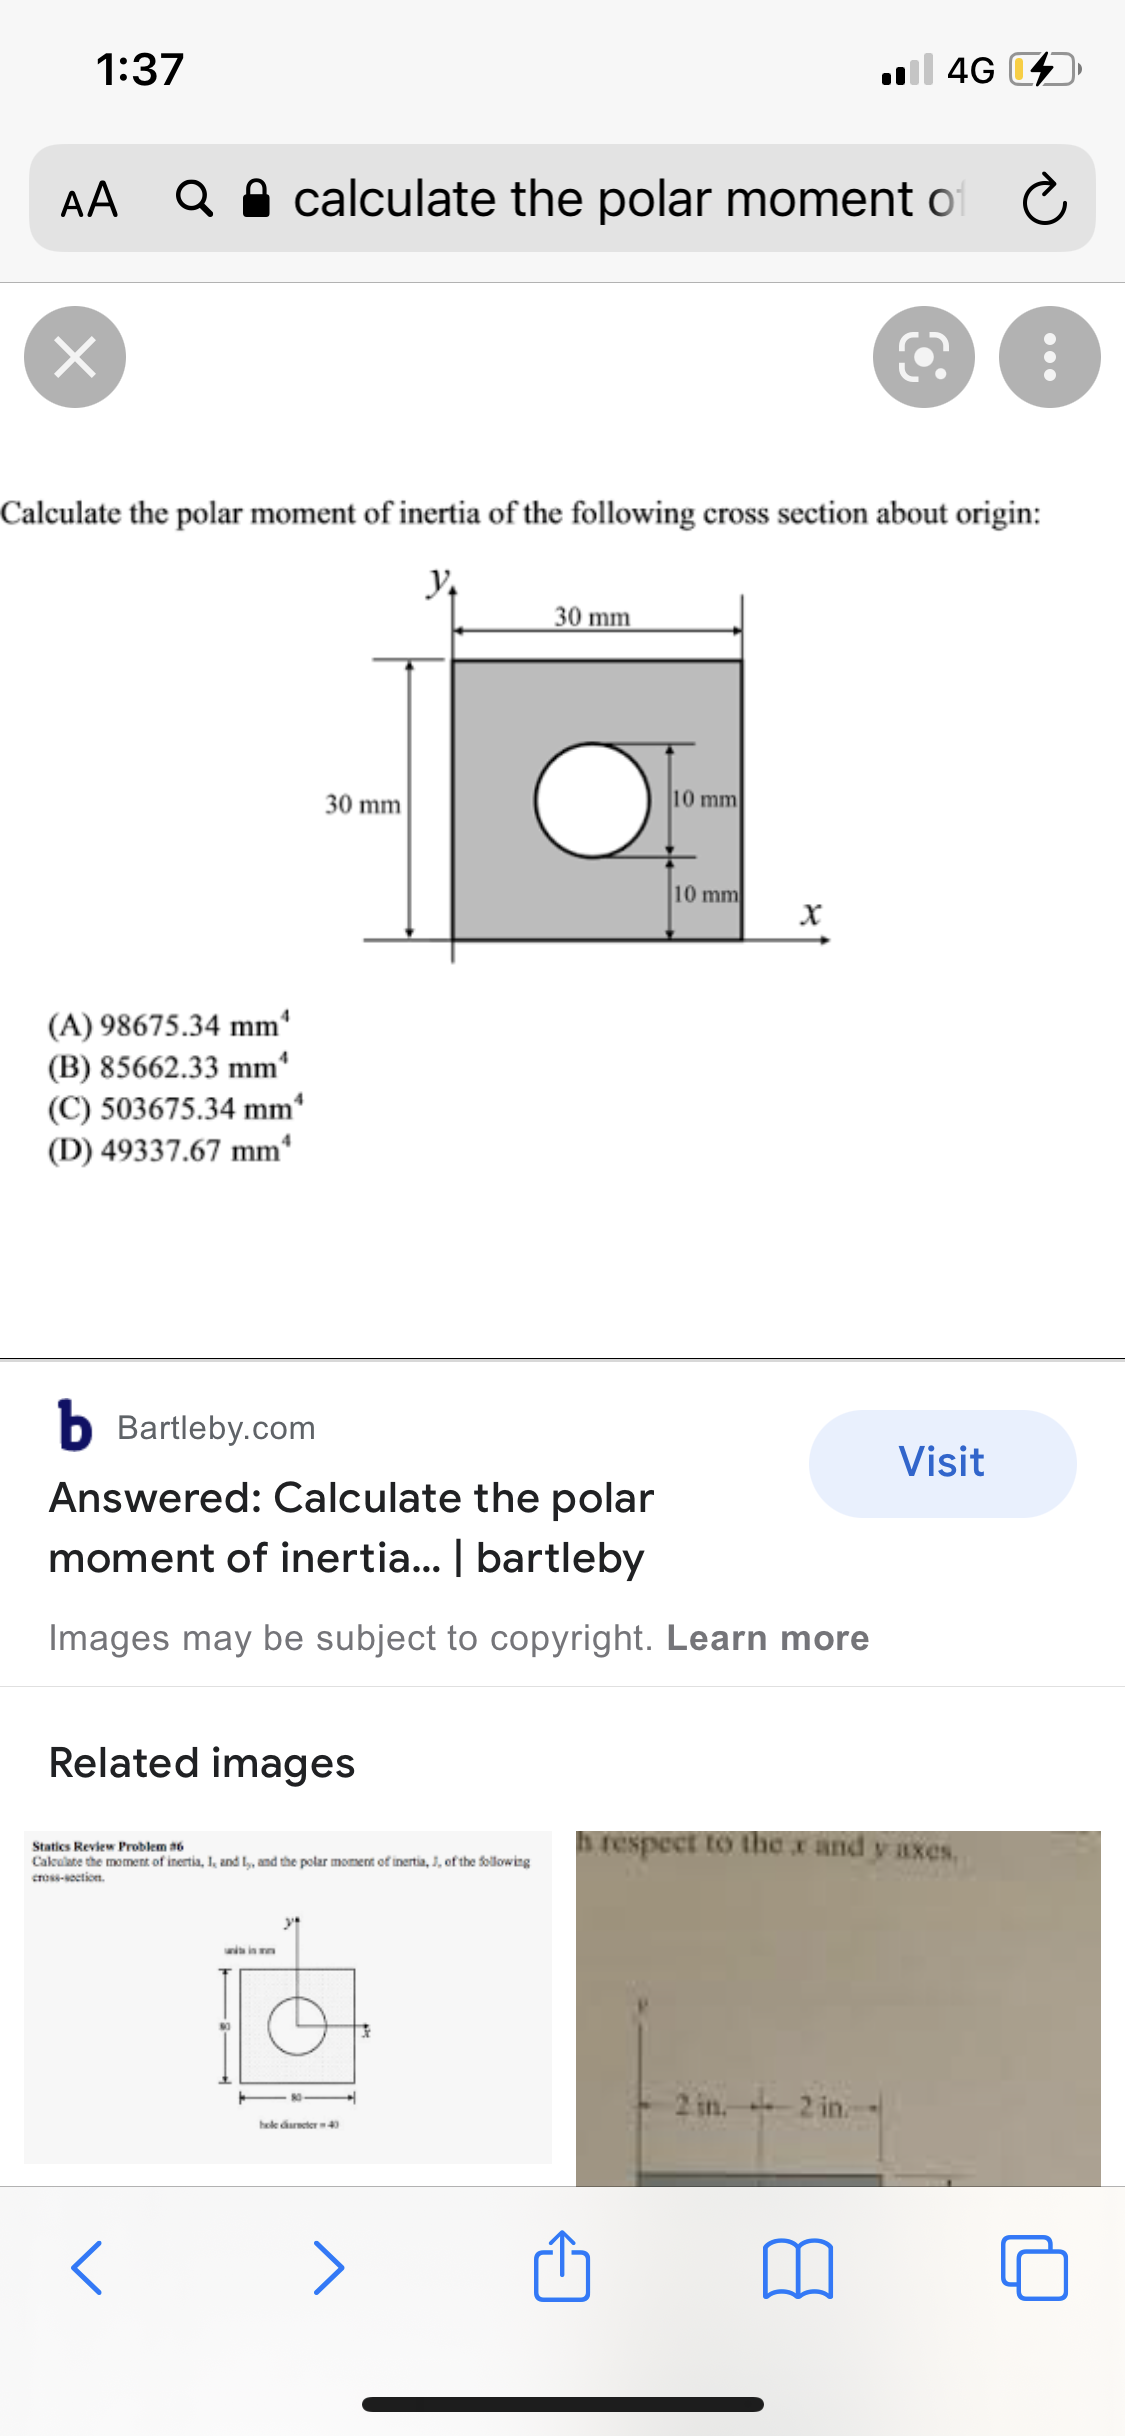 1:37
l 4G D
AA
Q A calculate the polar moment of C
Calculate the polar moment of inertia of the following cross section about origin:
30 mm
30 mm
10 mm
10 mm
(A) 98675.34 mm'
(B) 85662.33 mm'
(C) 503675.34 mm
(D) 49337.67 mm*
b Bartleby.com
Visit
Answered: Calculate the polar
moment of inertia... | bartleby
Images may be subject to copyright. Learn more
Related images
Statics Review Problem a6
Caleulate the moment of inertia, I, and L,, and the polar moment of inertia, J, of the following
cross-socticn.
respect to the x and y axes,
unia in n
2 in. 2 in.
hole dareter 40
>
